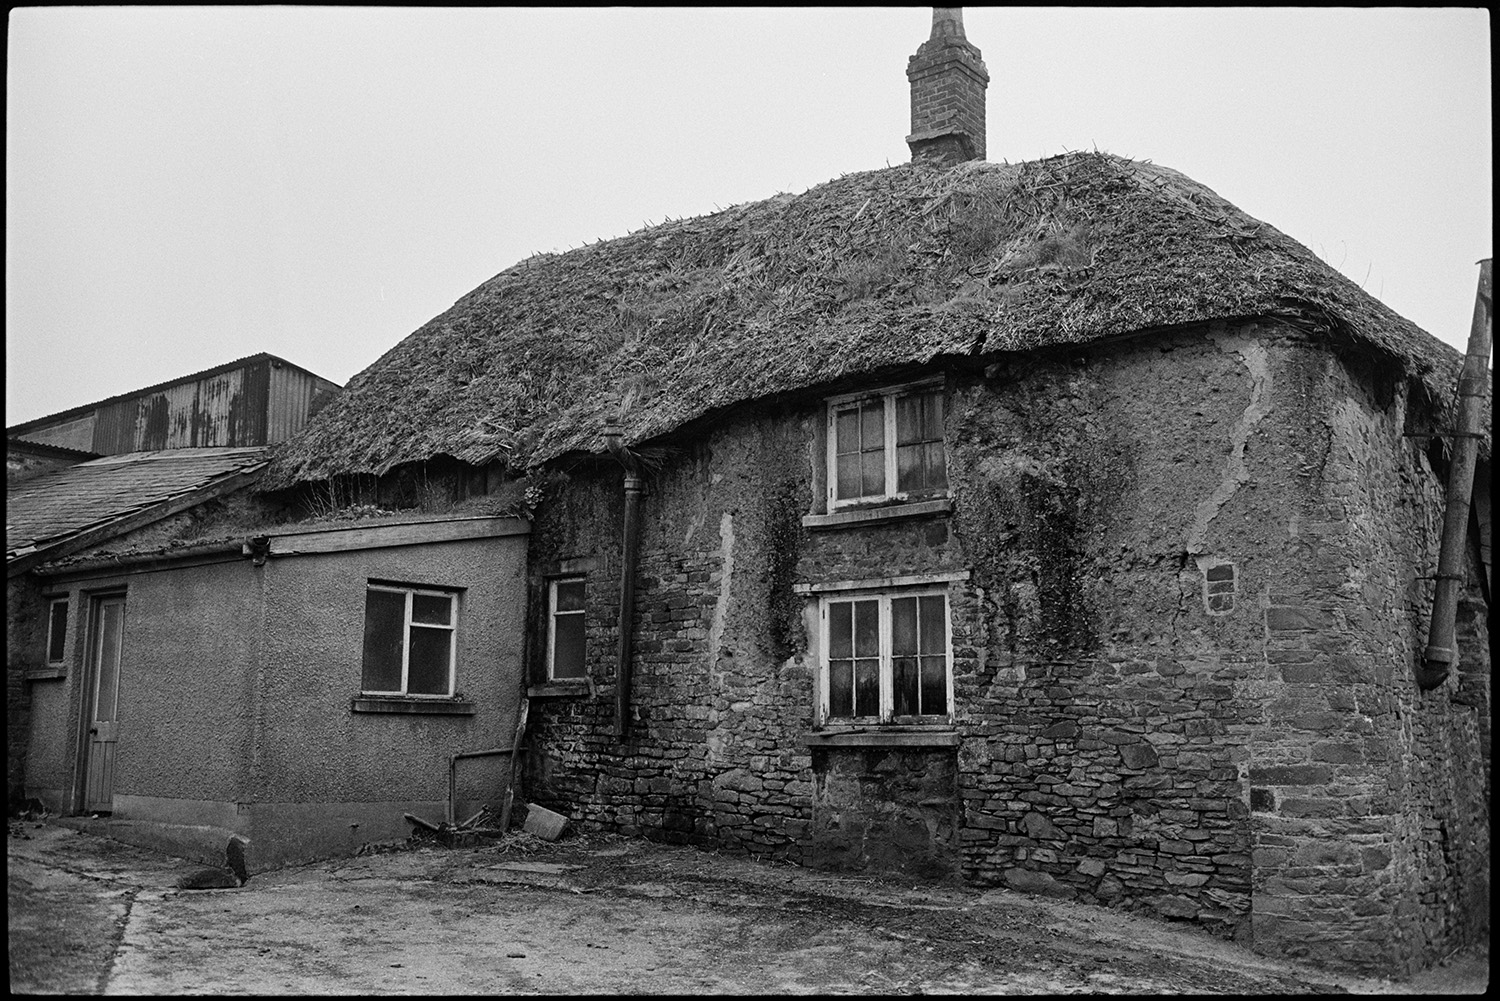 Back of derelict farmhouse, stone, cob and thatch. Front in state of collapse, window.
[The back of a derelict cottage at Mary Week, near Chulmleigh. It is constructed of cob, stone and thatch with a concrete block outhouse, and corrugated iron barns in the background.]